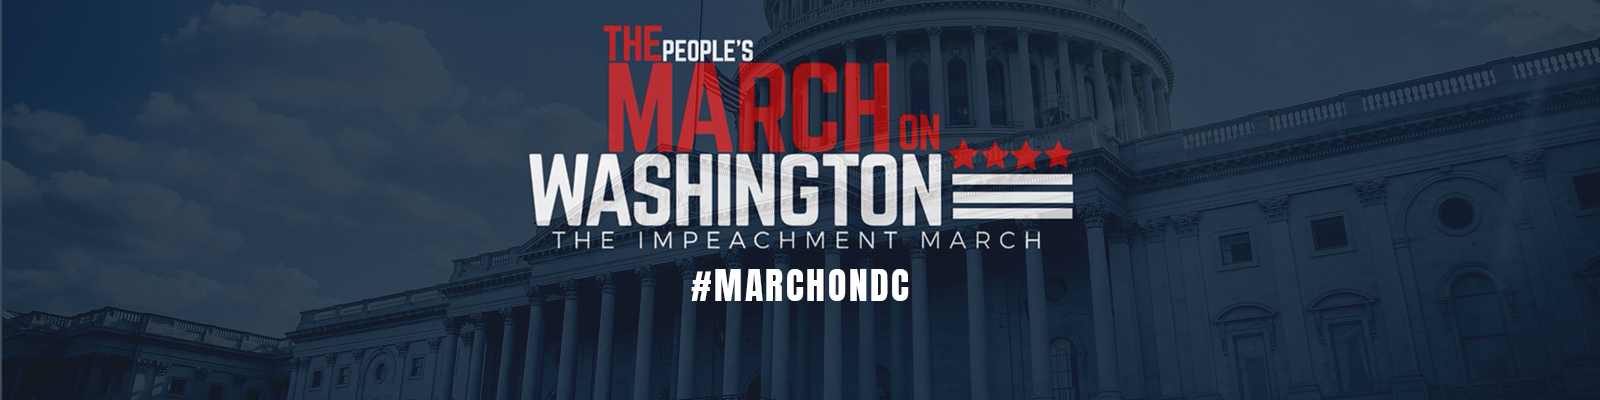 The People's March on Washington